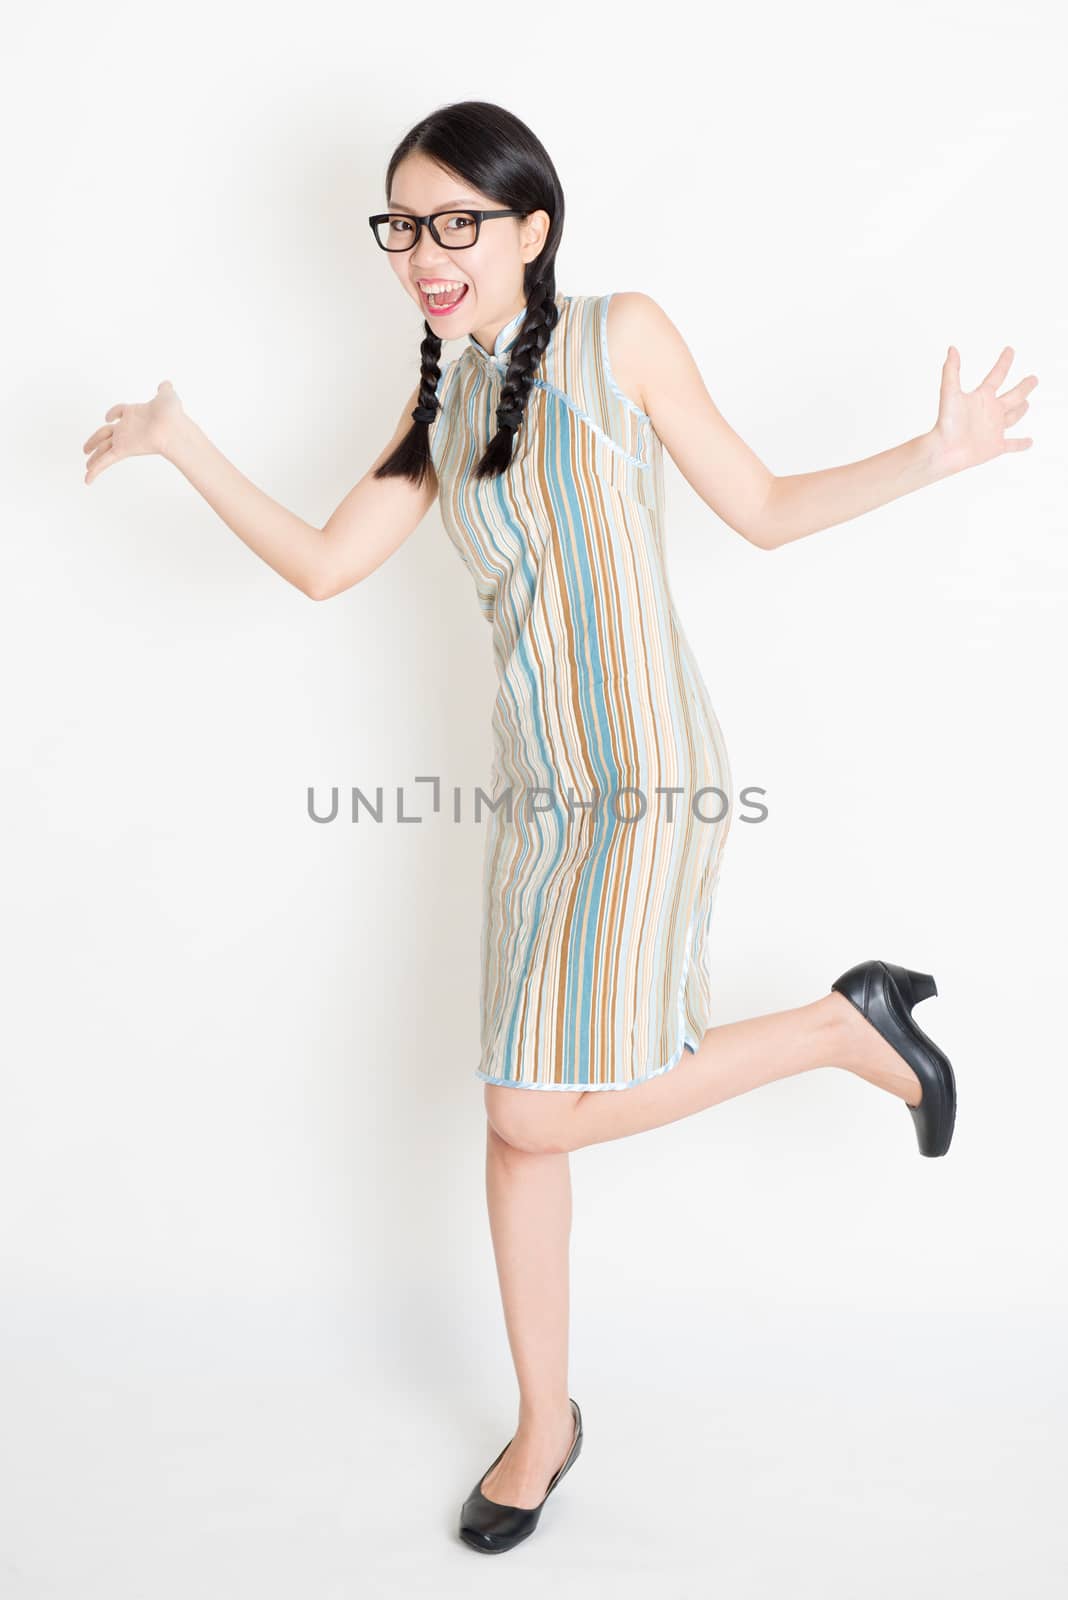 Portrait of excited young Asian girl in traditional qipao dress jumping around, full length standing on plain background.